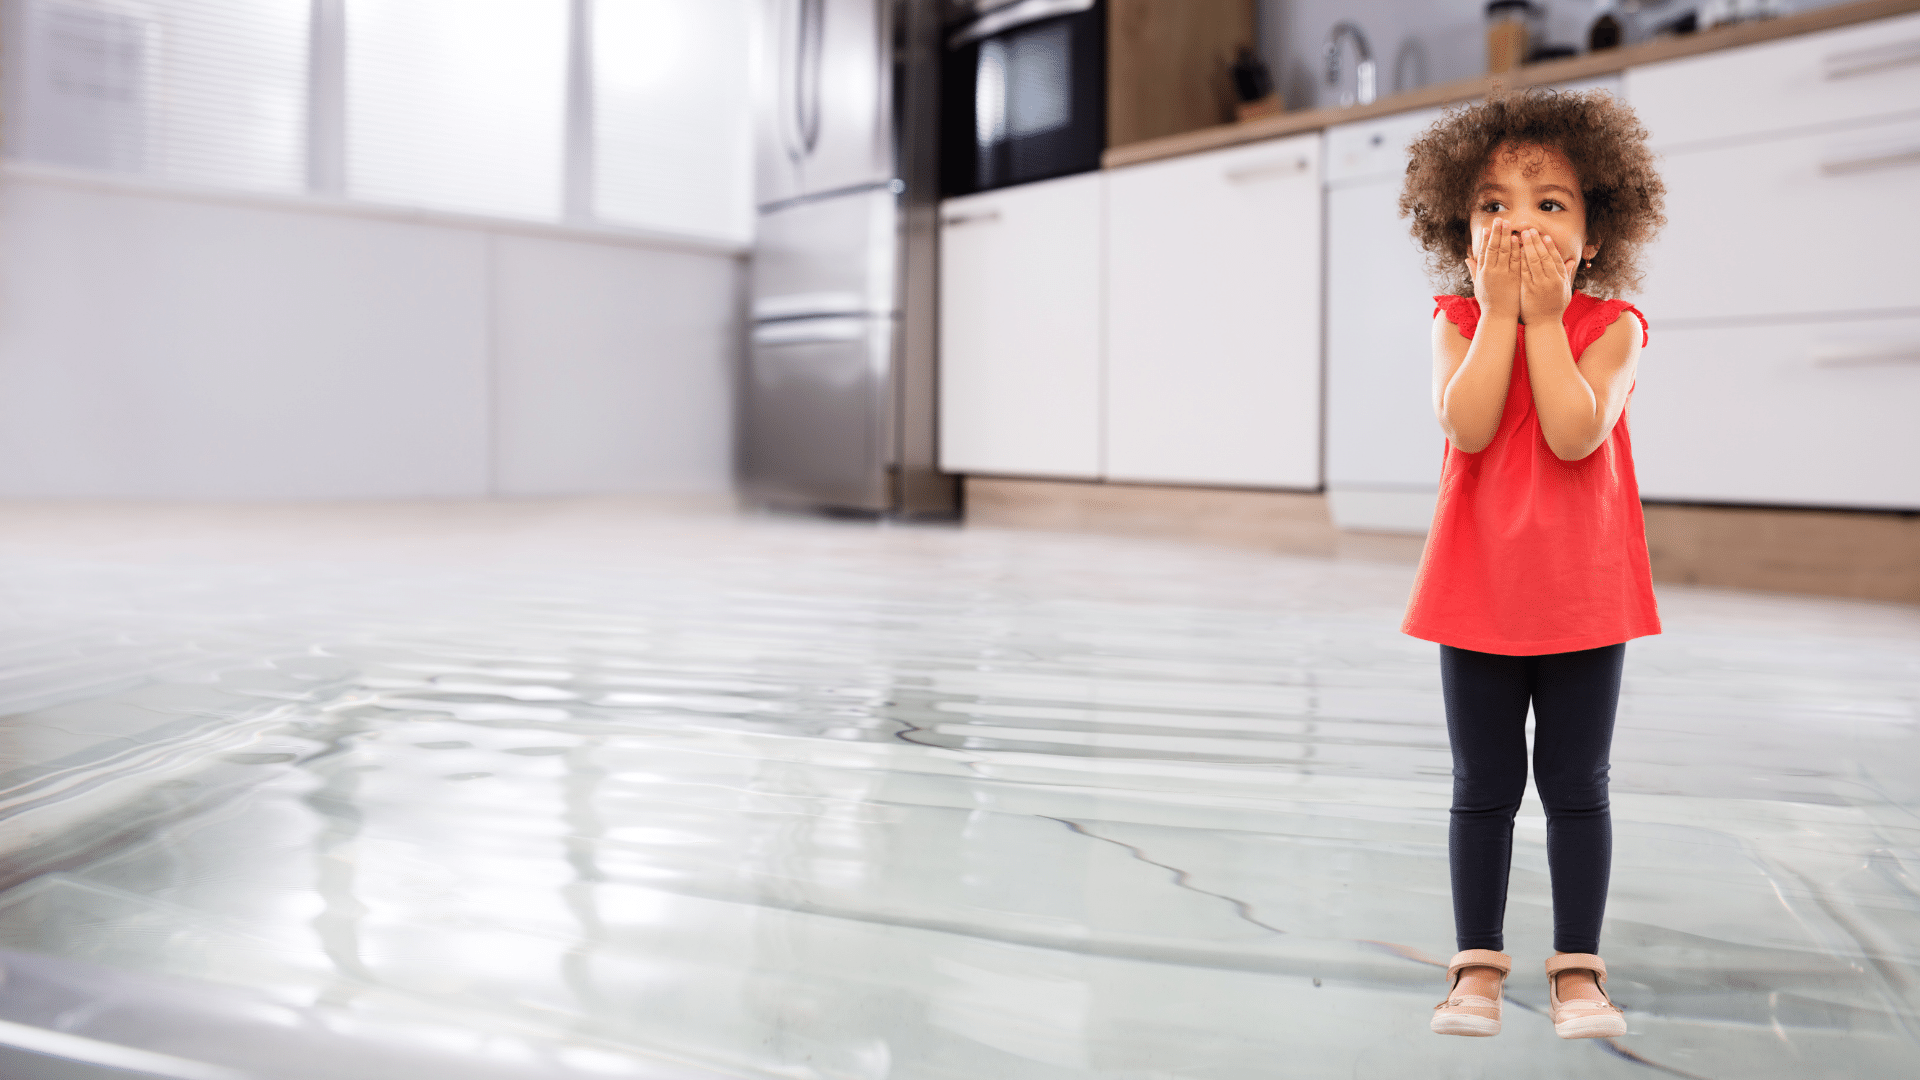 Protect Your Lawrenceville, GA Home From Water Damage & Prevent Mold Infestation